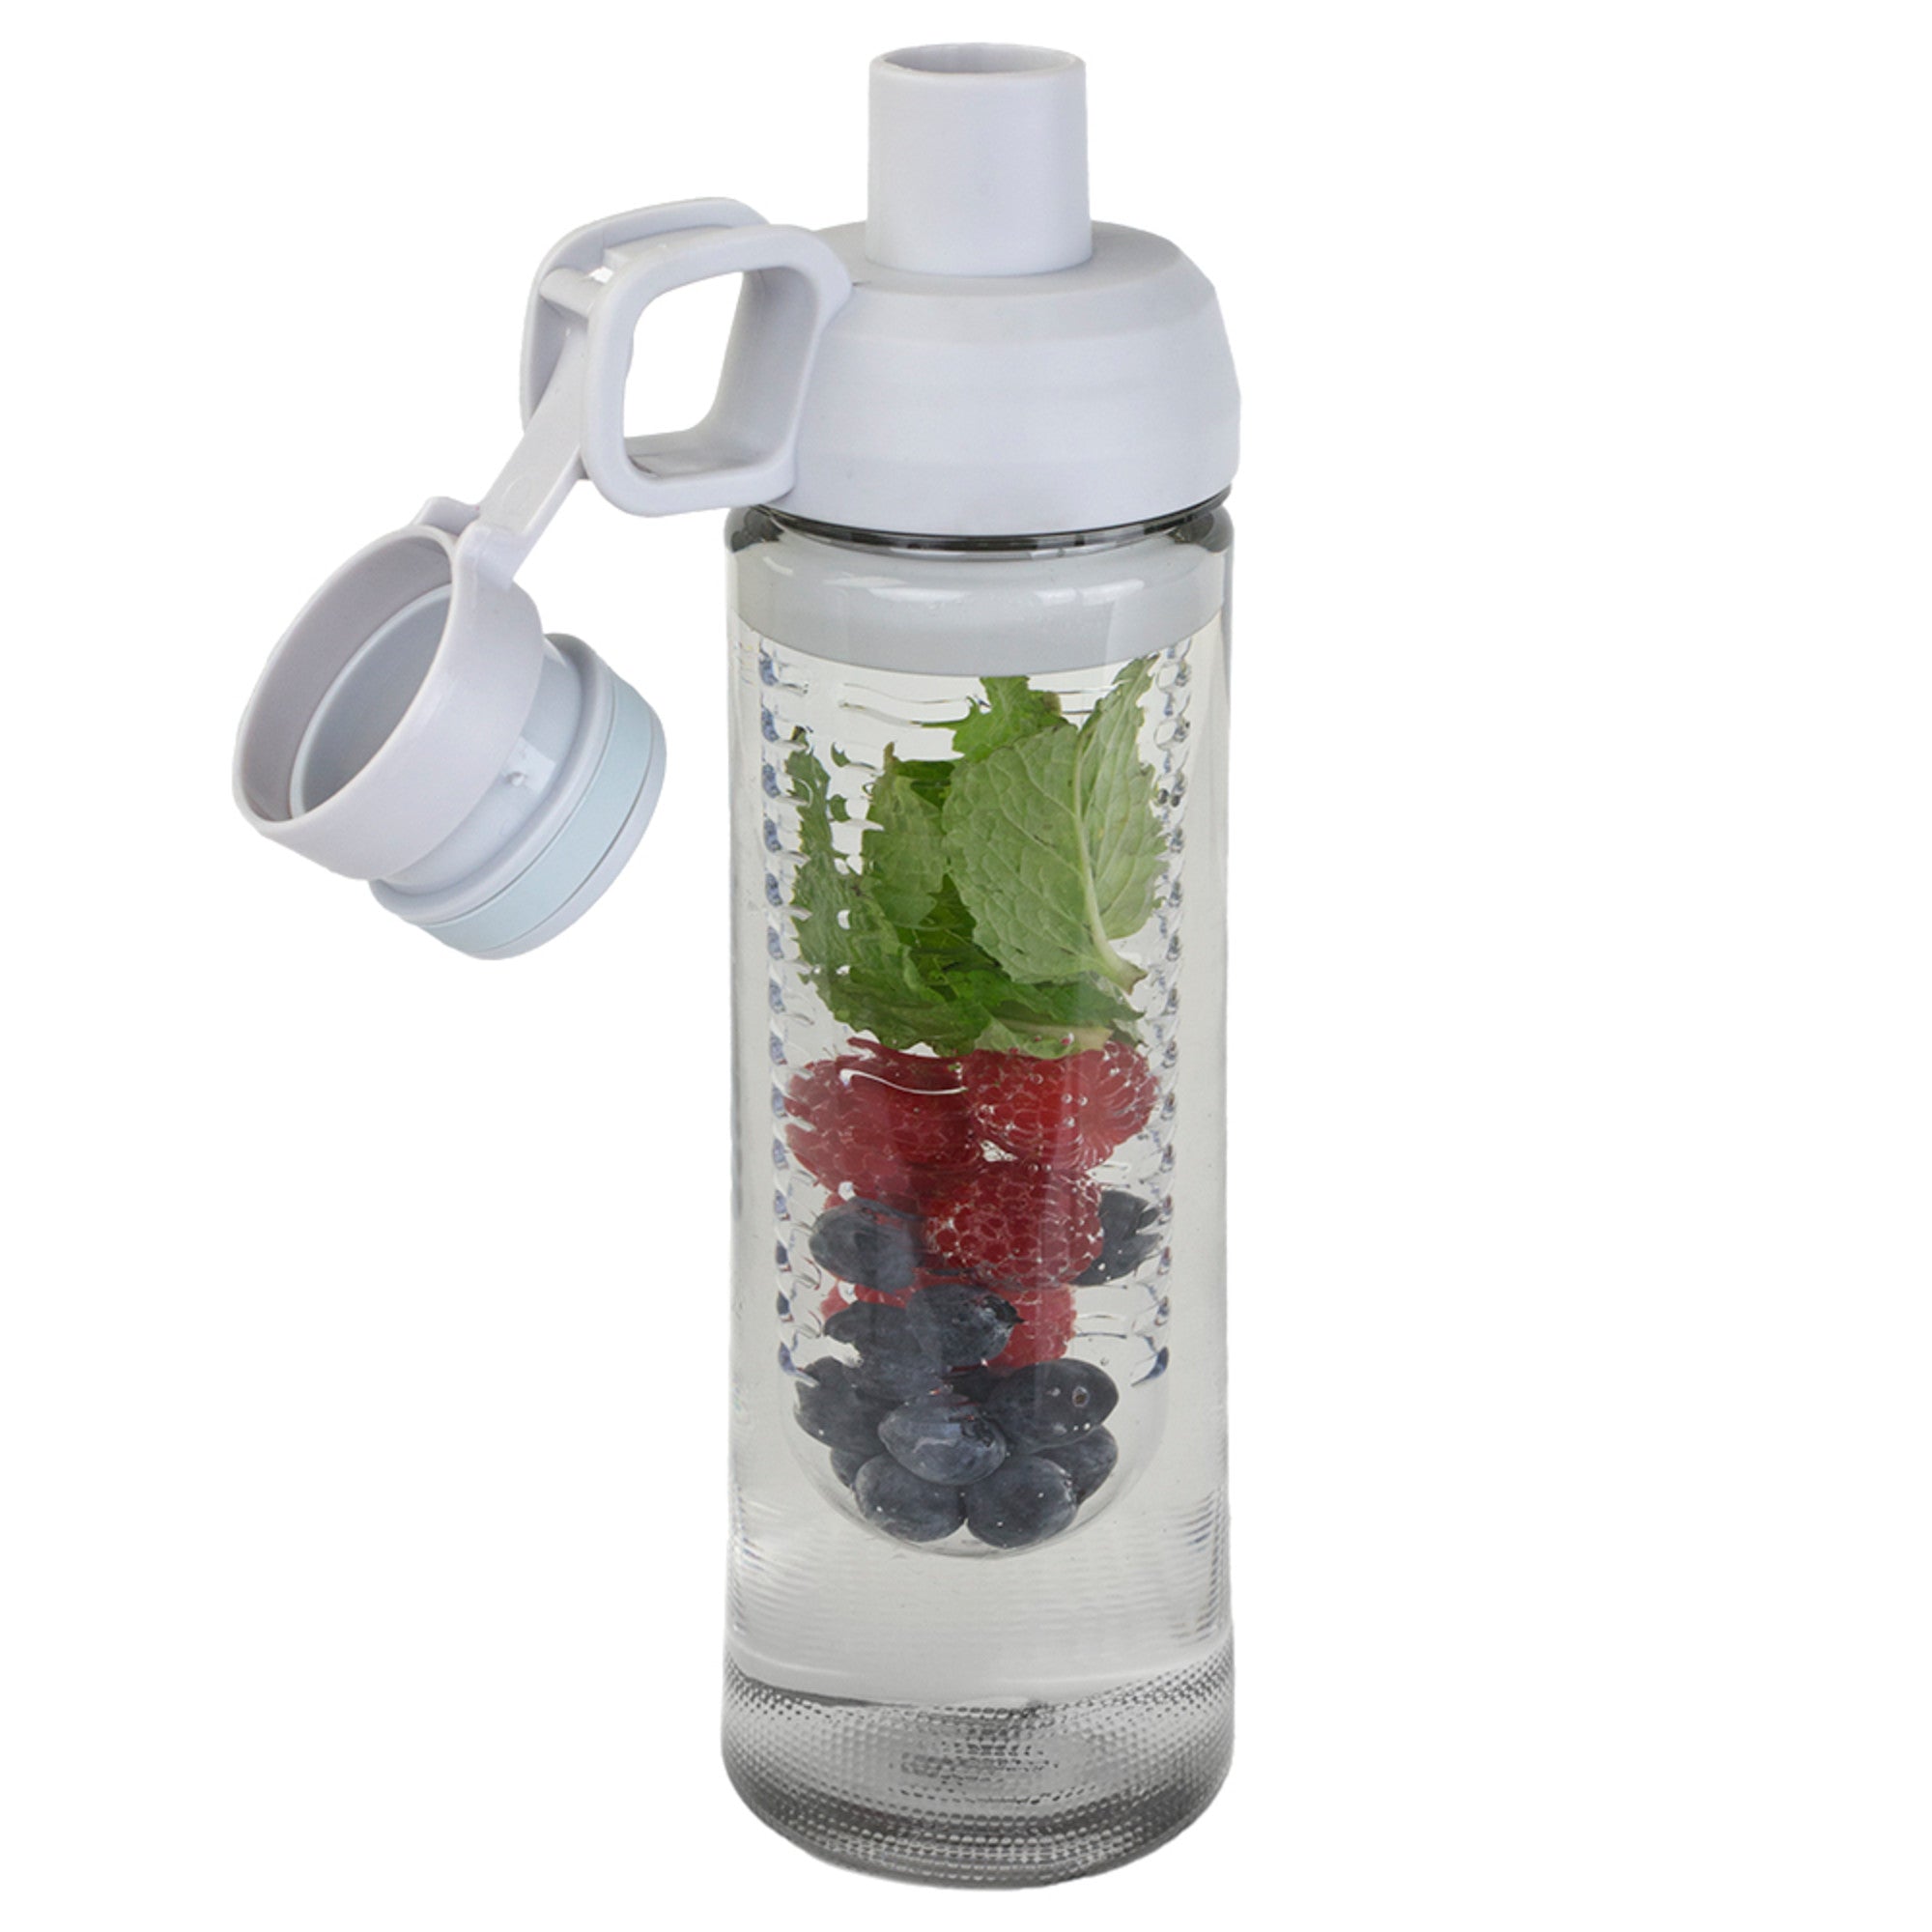 Home Basics 24 oz. Plastic Infuser Bottle with Twist Top - Assorted Colors